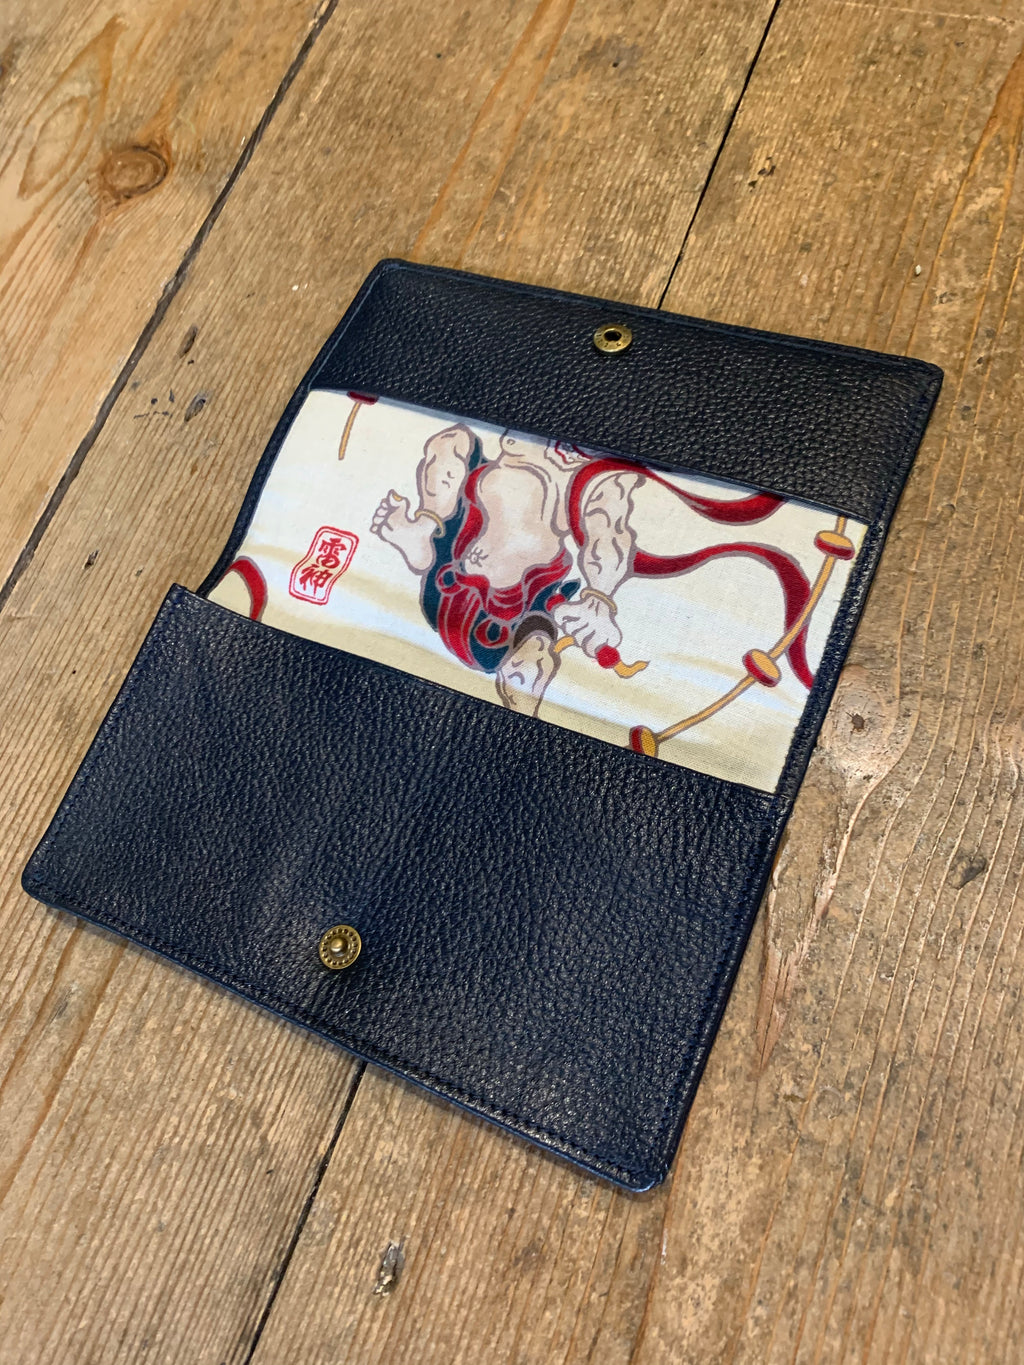 Black Tobacco Pouch - Mythological Pattern | Ray Steels Leather Aprons